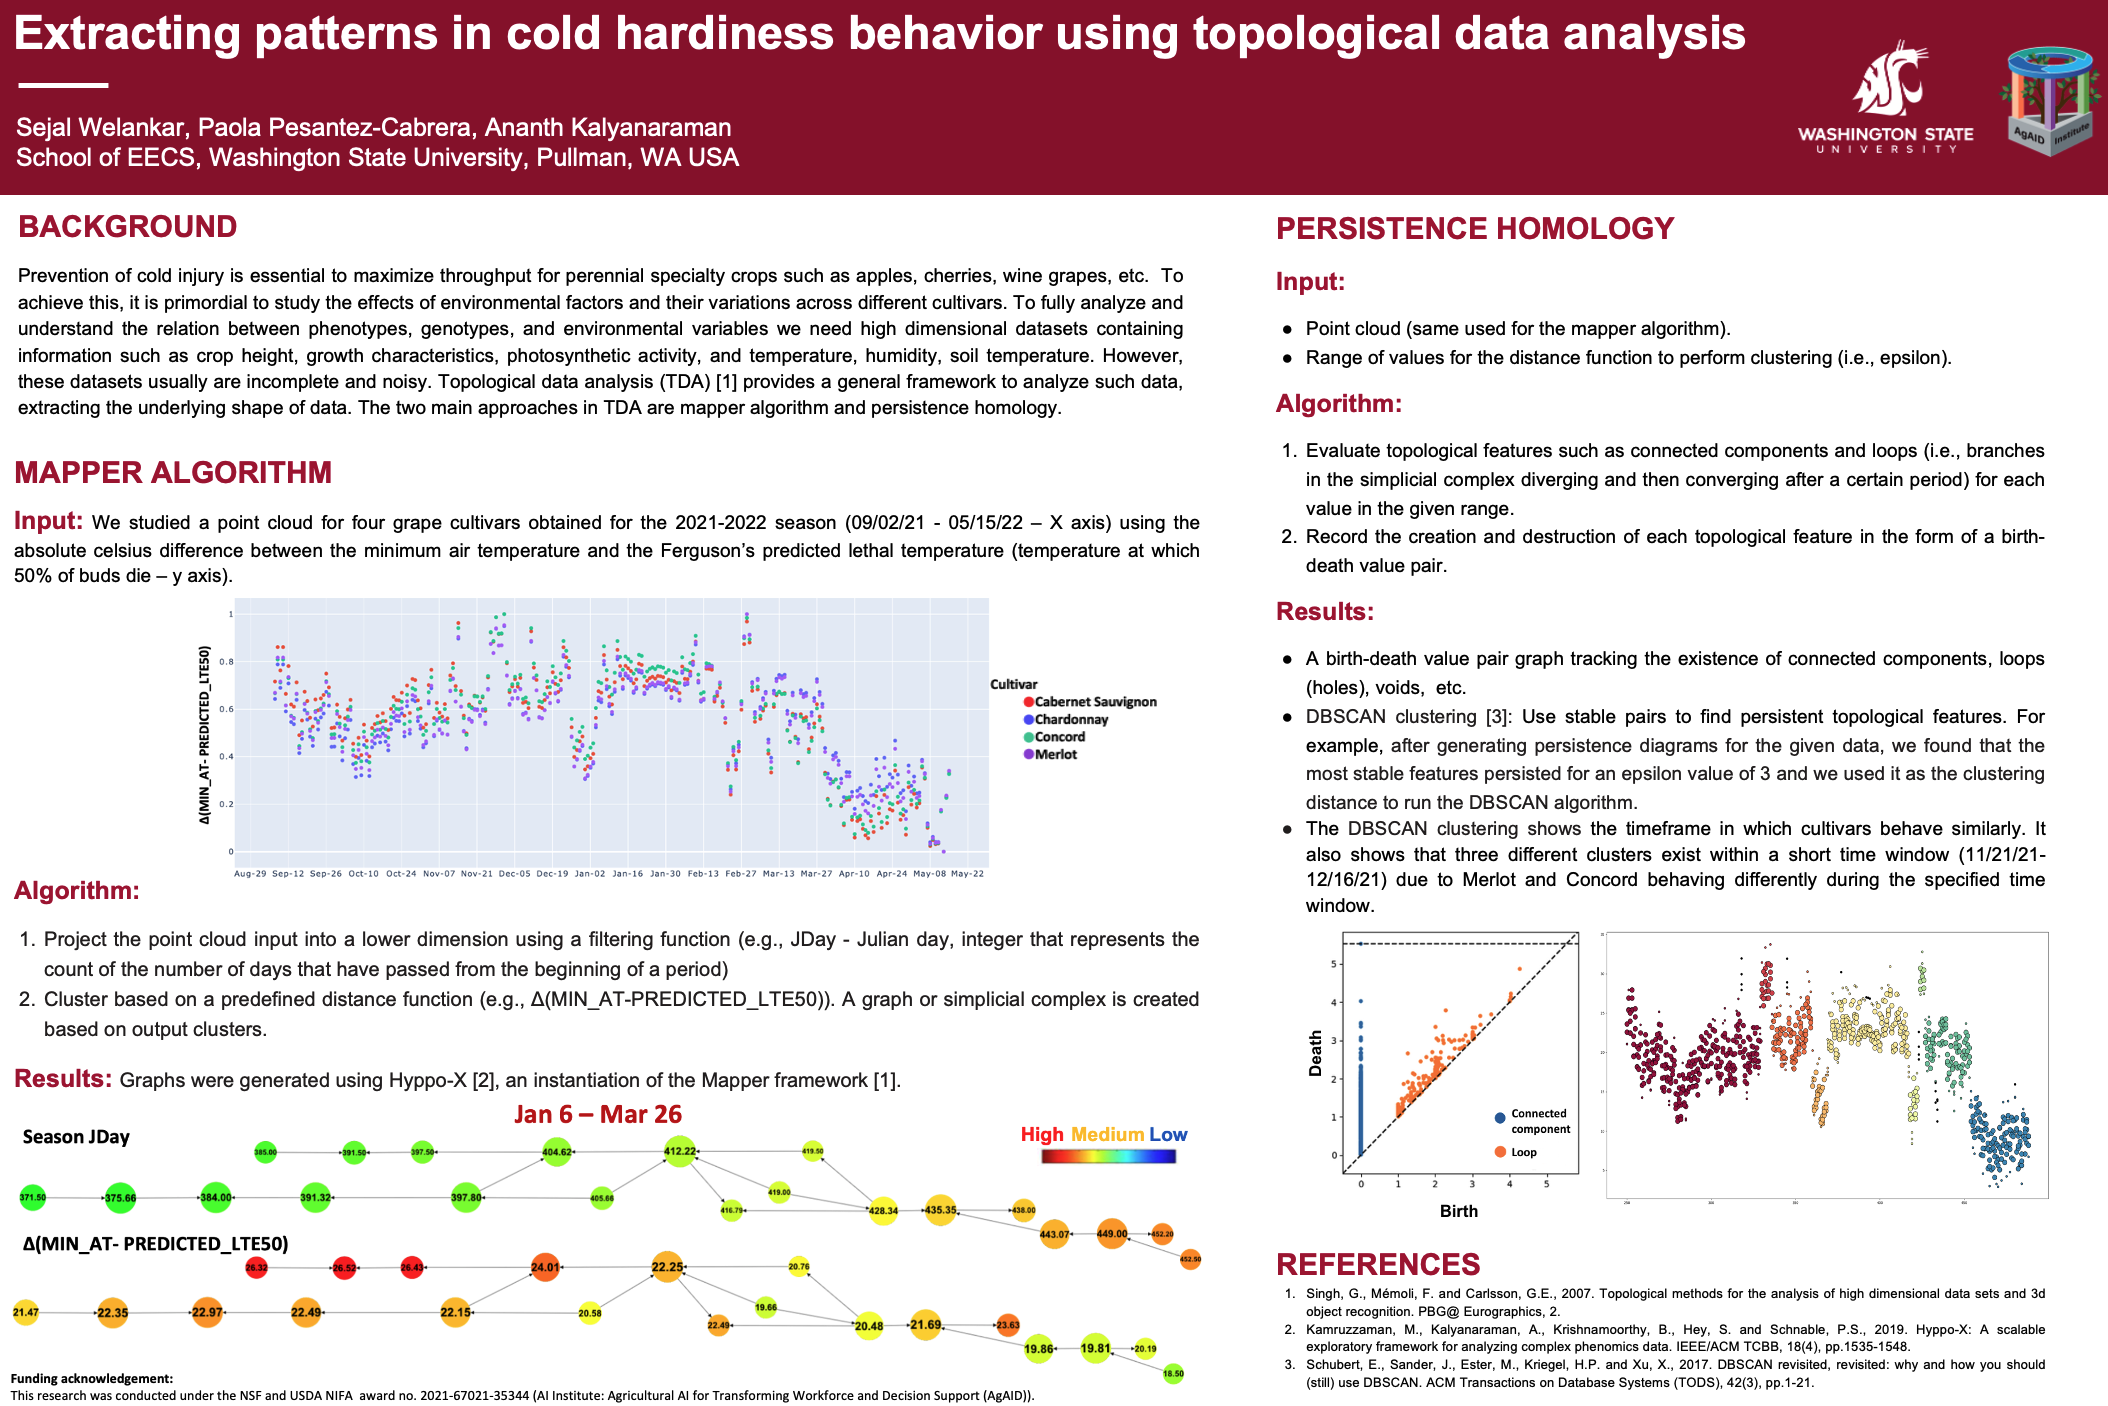 Extracting patterns in cold hardiness behavior using topological data analysis